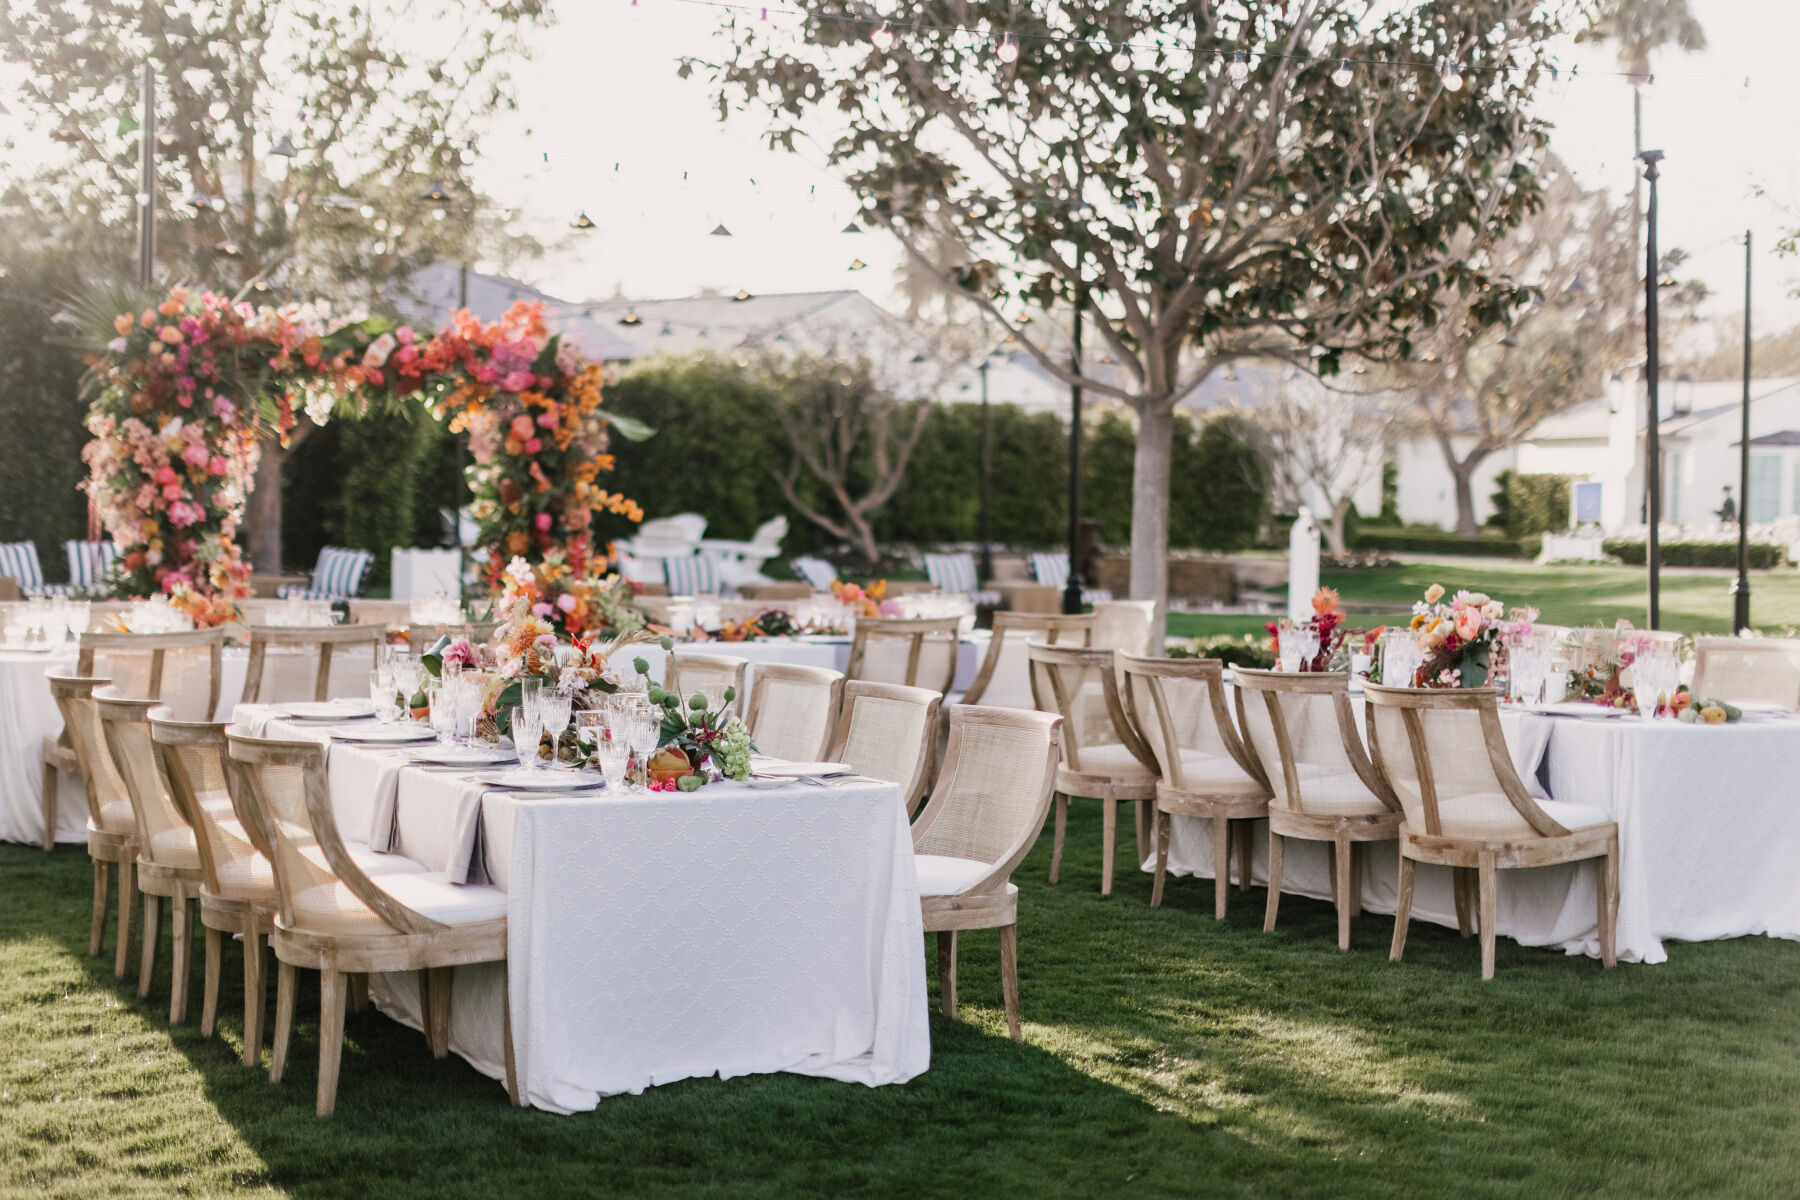 Colorful Wedding: A reception setup up with a colorful floral arch and rectangular tables with wooden and woven chairs.